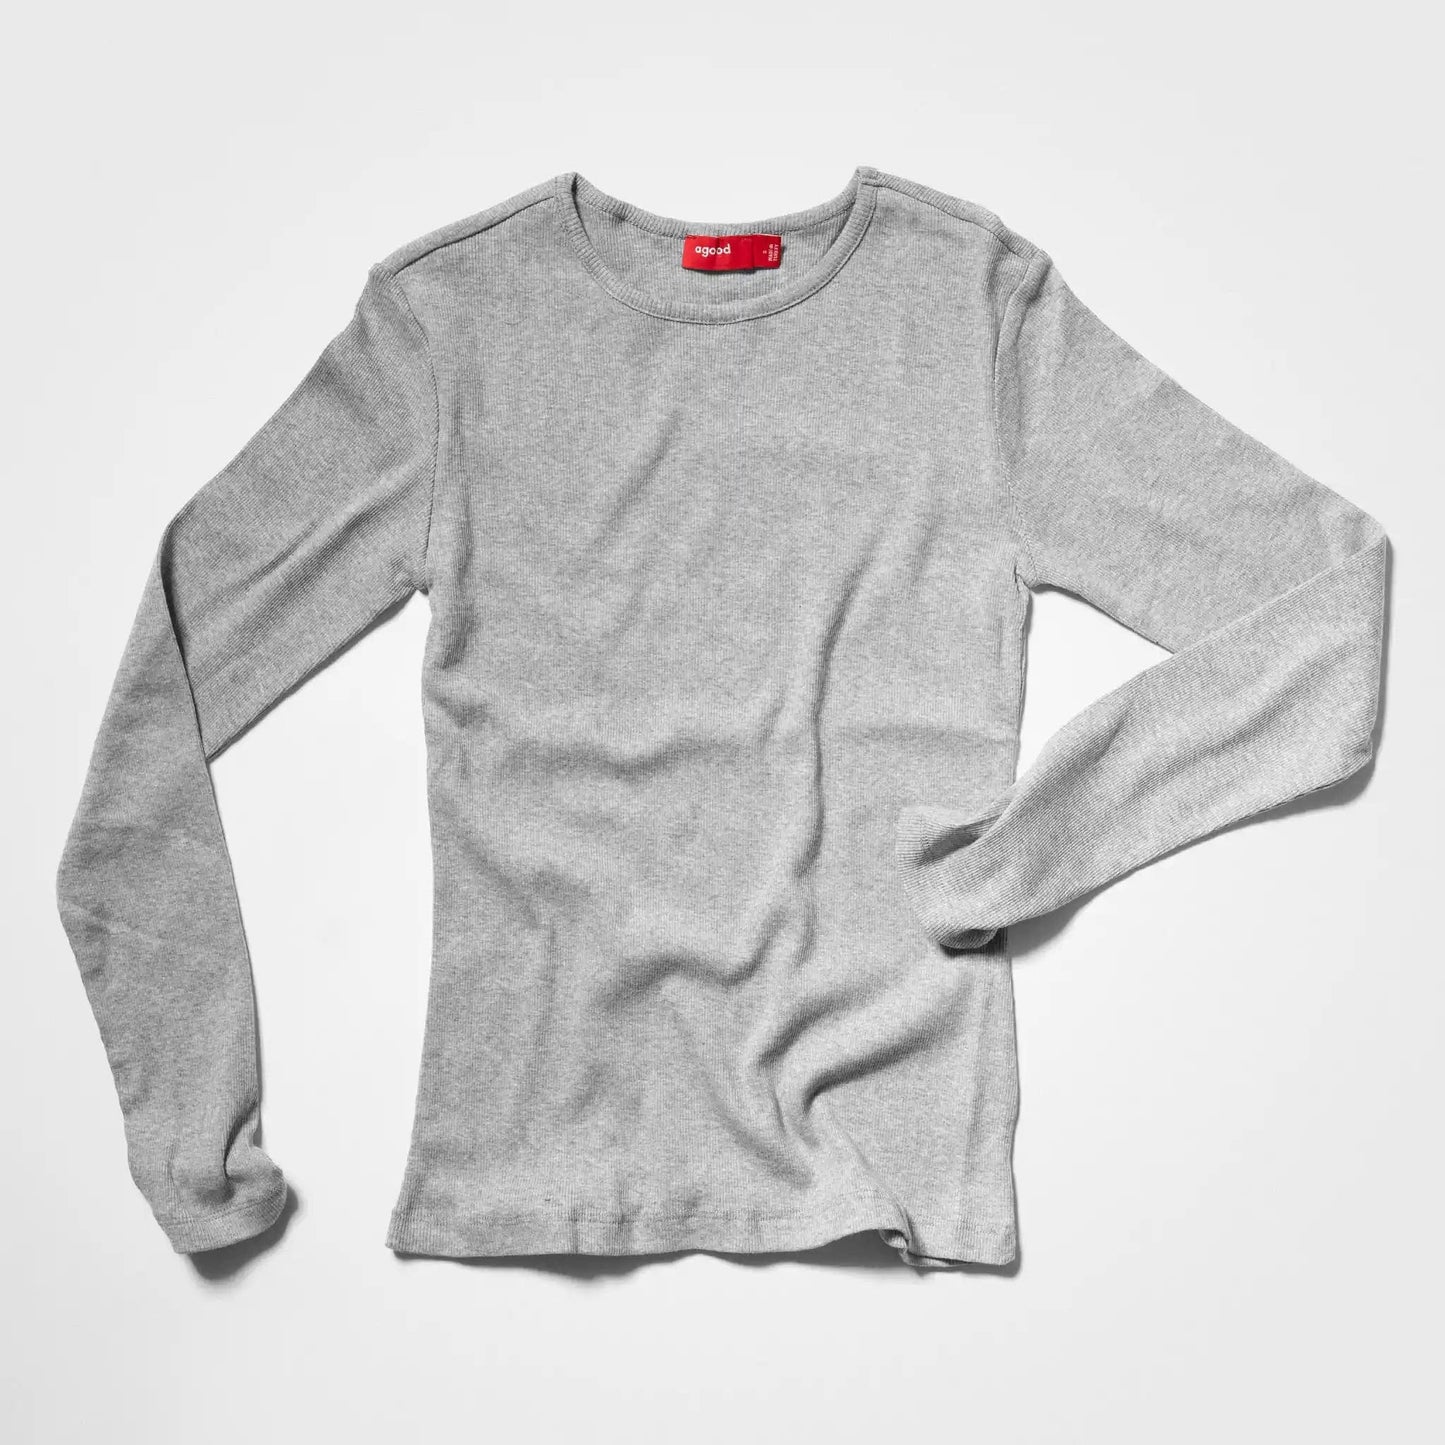 Women’s Recycled Cotton Rib Long Sleeve Top, Heather Grey